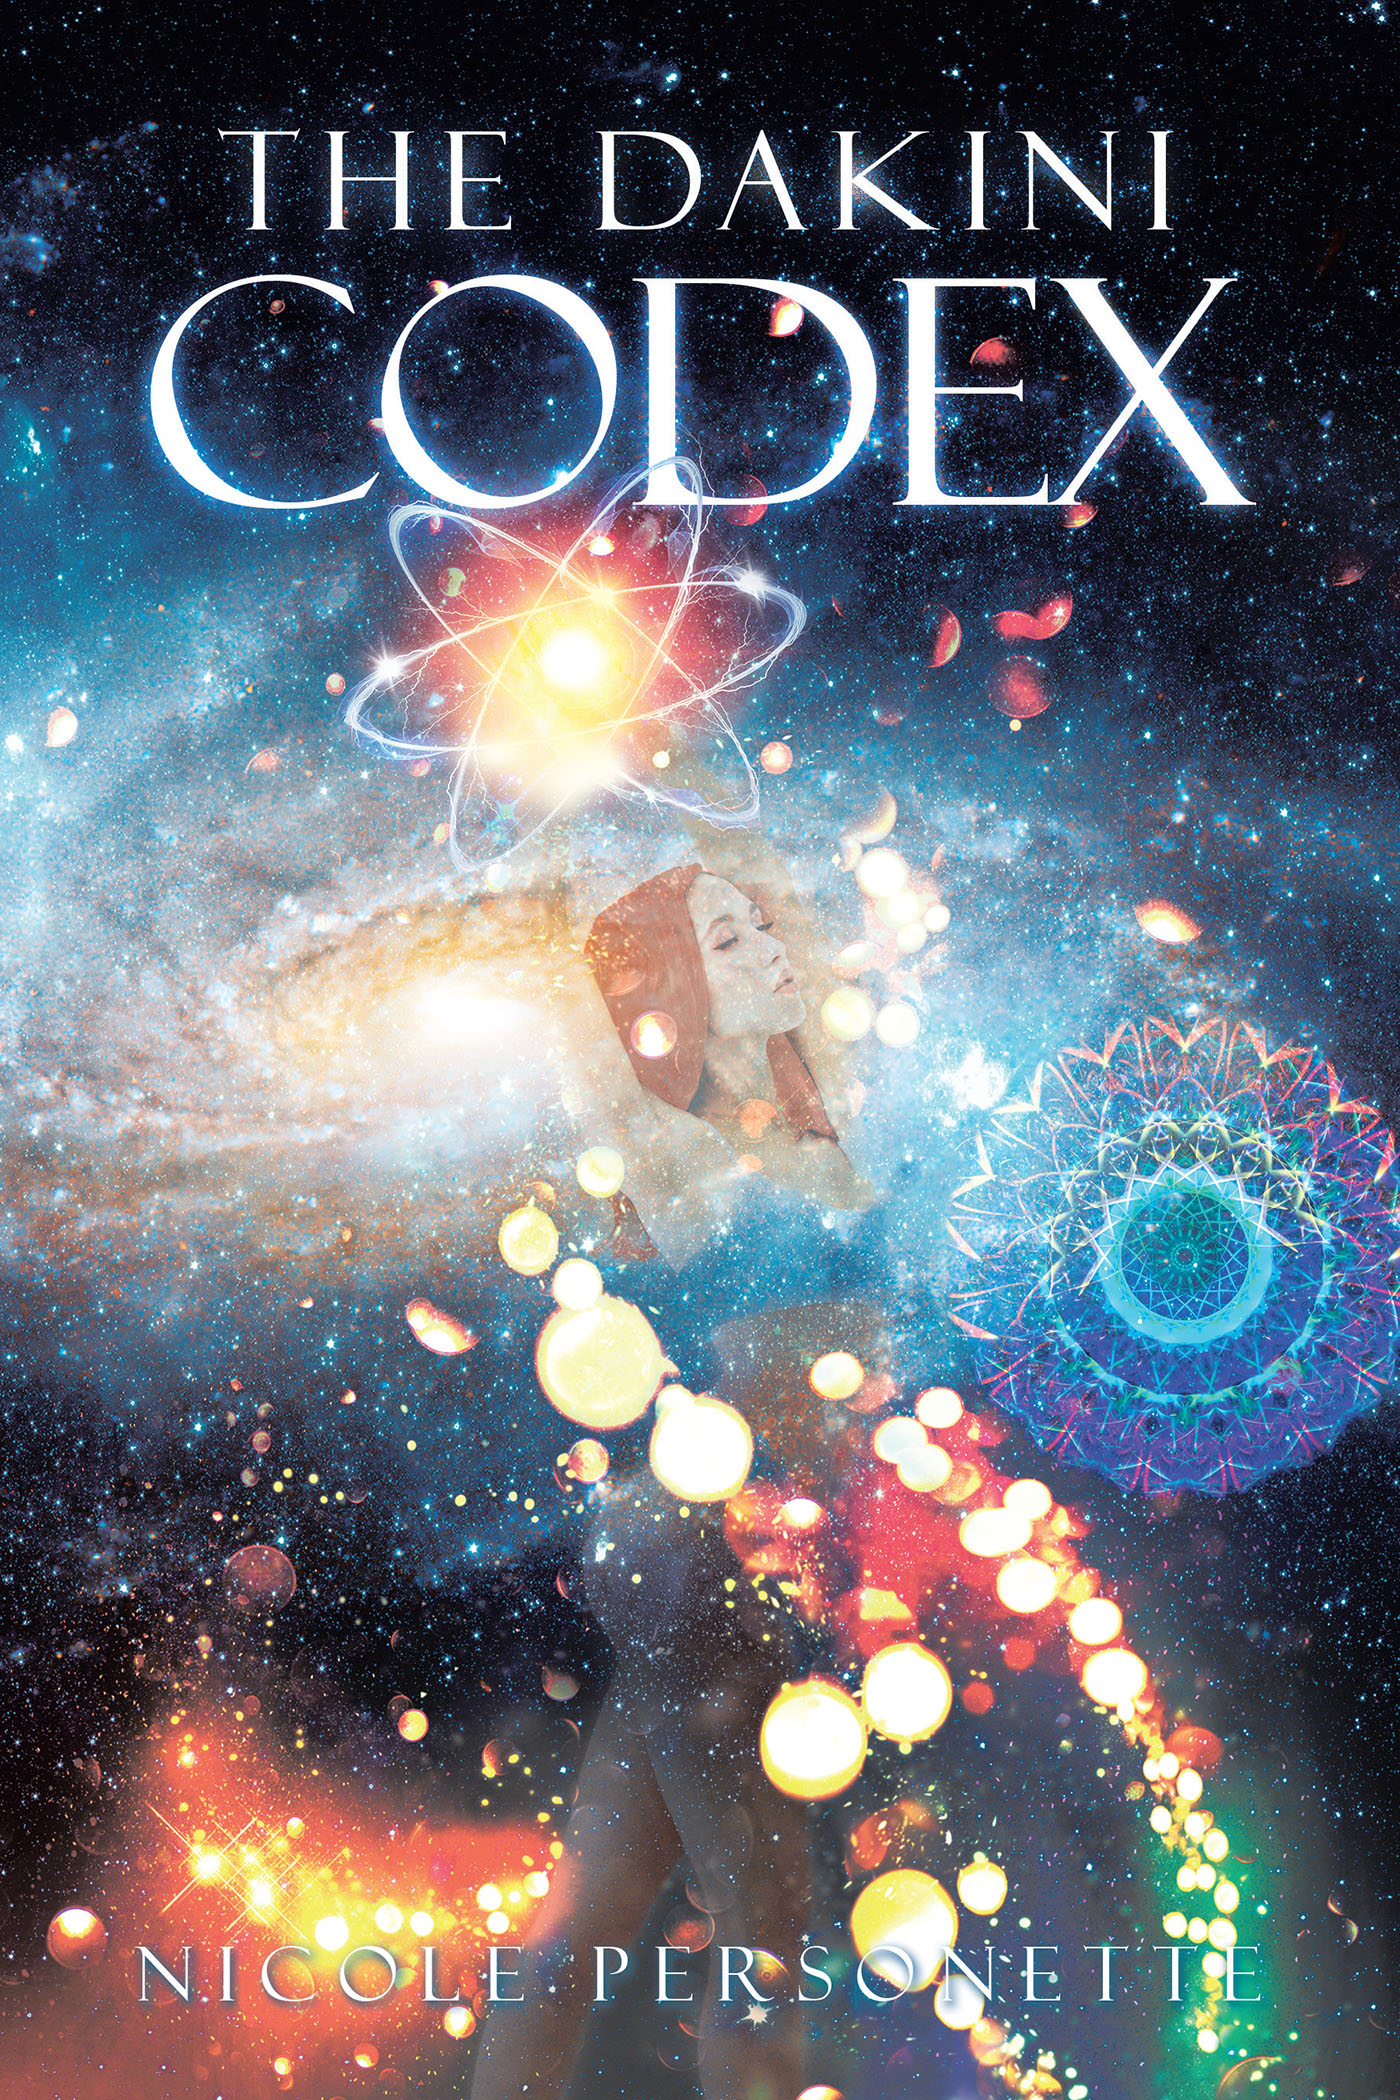 Author Nicole Personette’s New Book, "The Dakini Codex," is an Assortment of Poems Tackling Complicated, Abstract, and Philosophical Themes of Human Identity